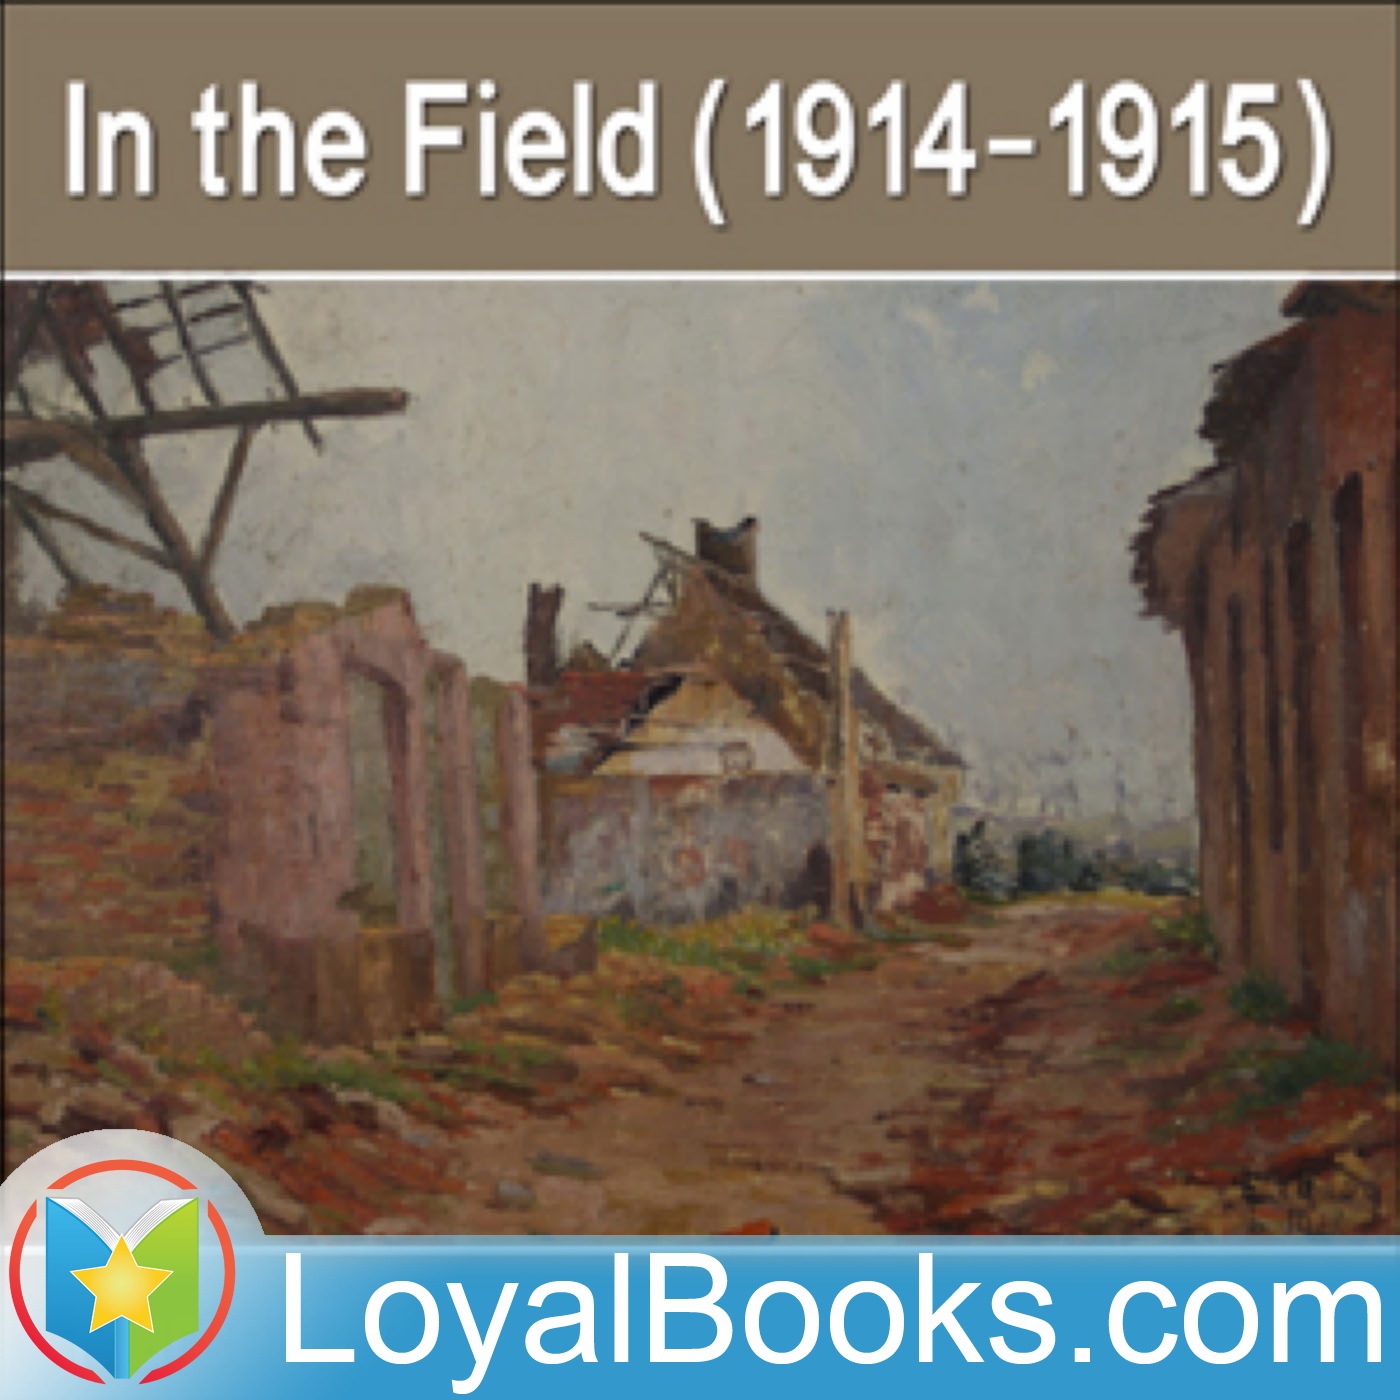 In the Field (1914-1915) by Marcel Dupont